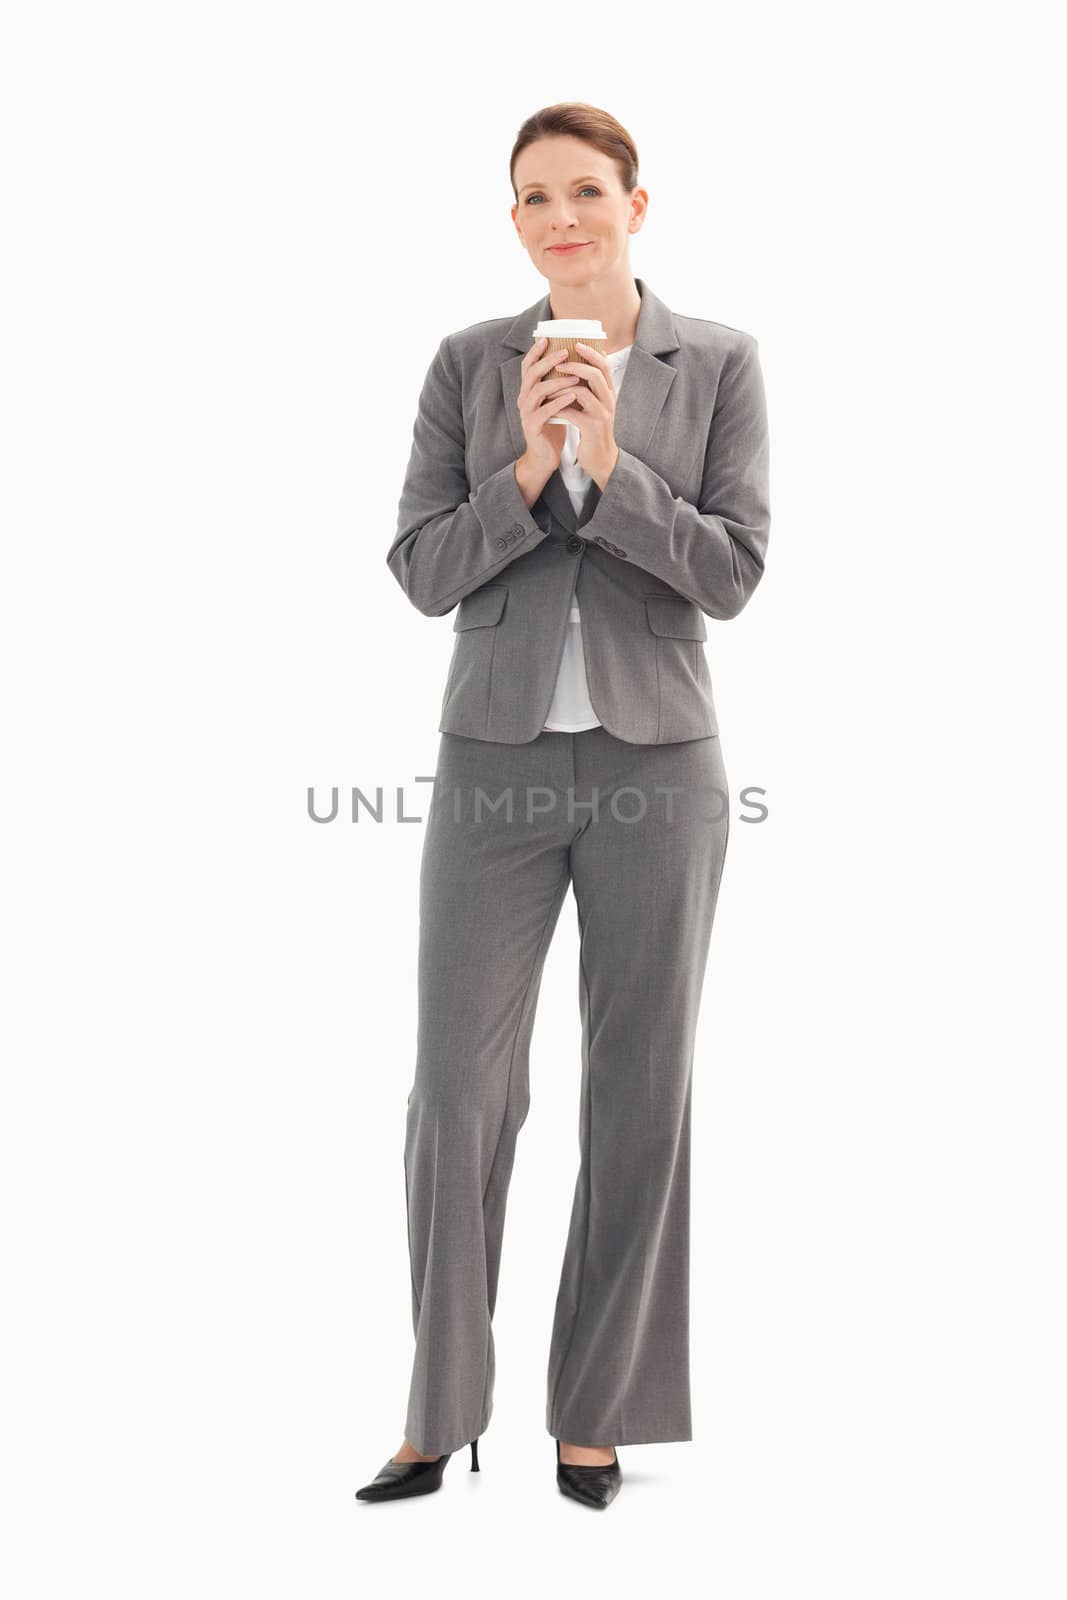 A businesswoman is holding a cup of coffee with her both hands